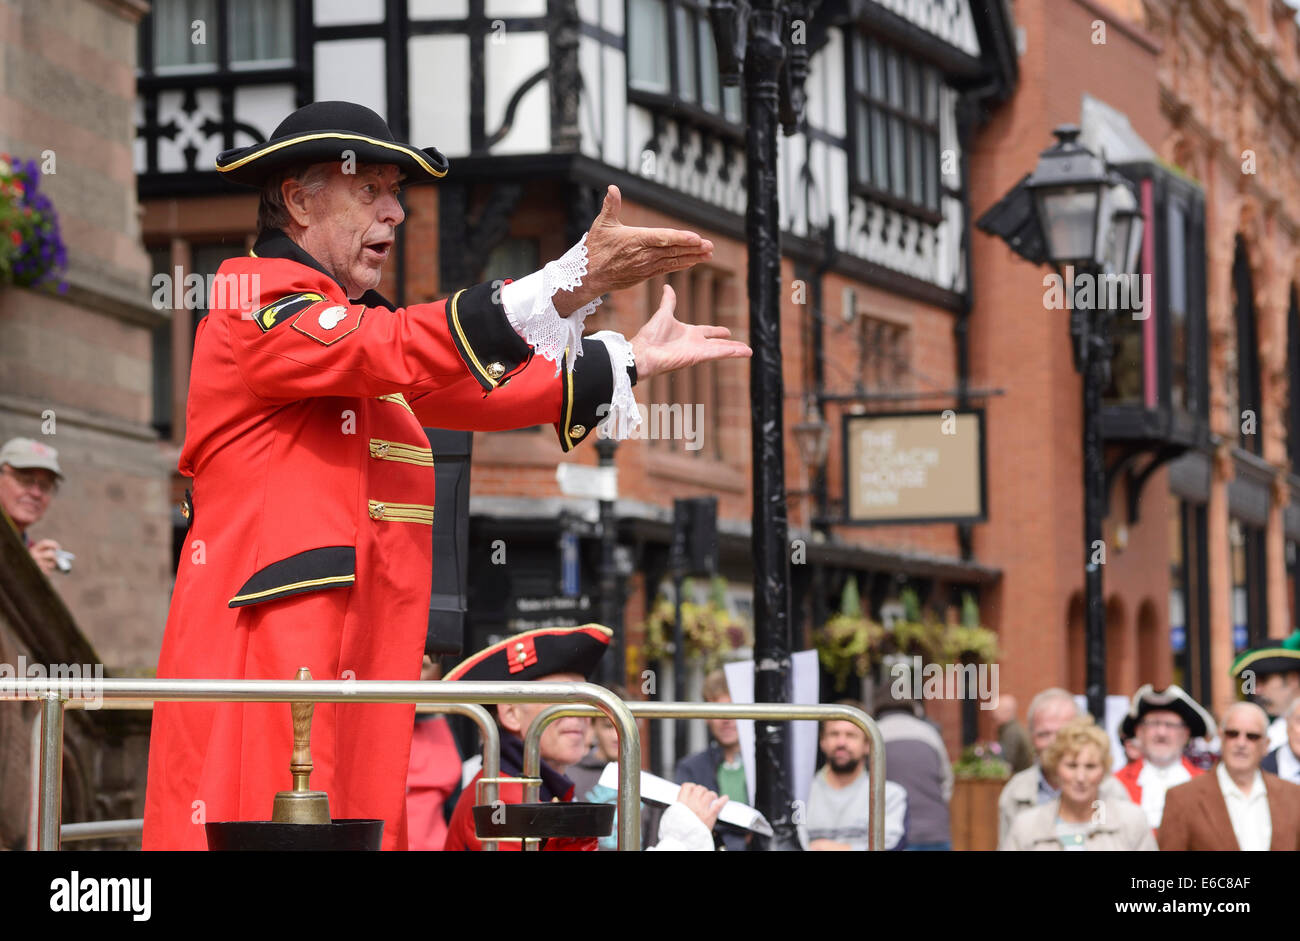 Chester, UK. 20th August, 2014. Robin Whicker Town Crier for Alderney in the Channel Islands at The World Town Crier Tournament being held outside the Town Hall in Chester City Centre UK Credit:  Andrew Paterson/Alamy Live News Stock Photo